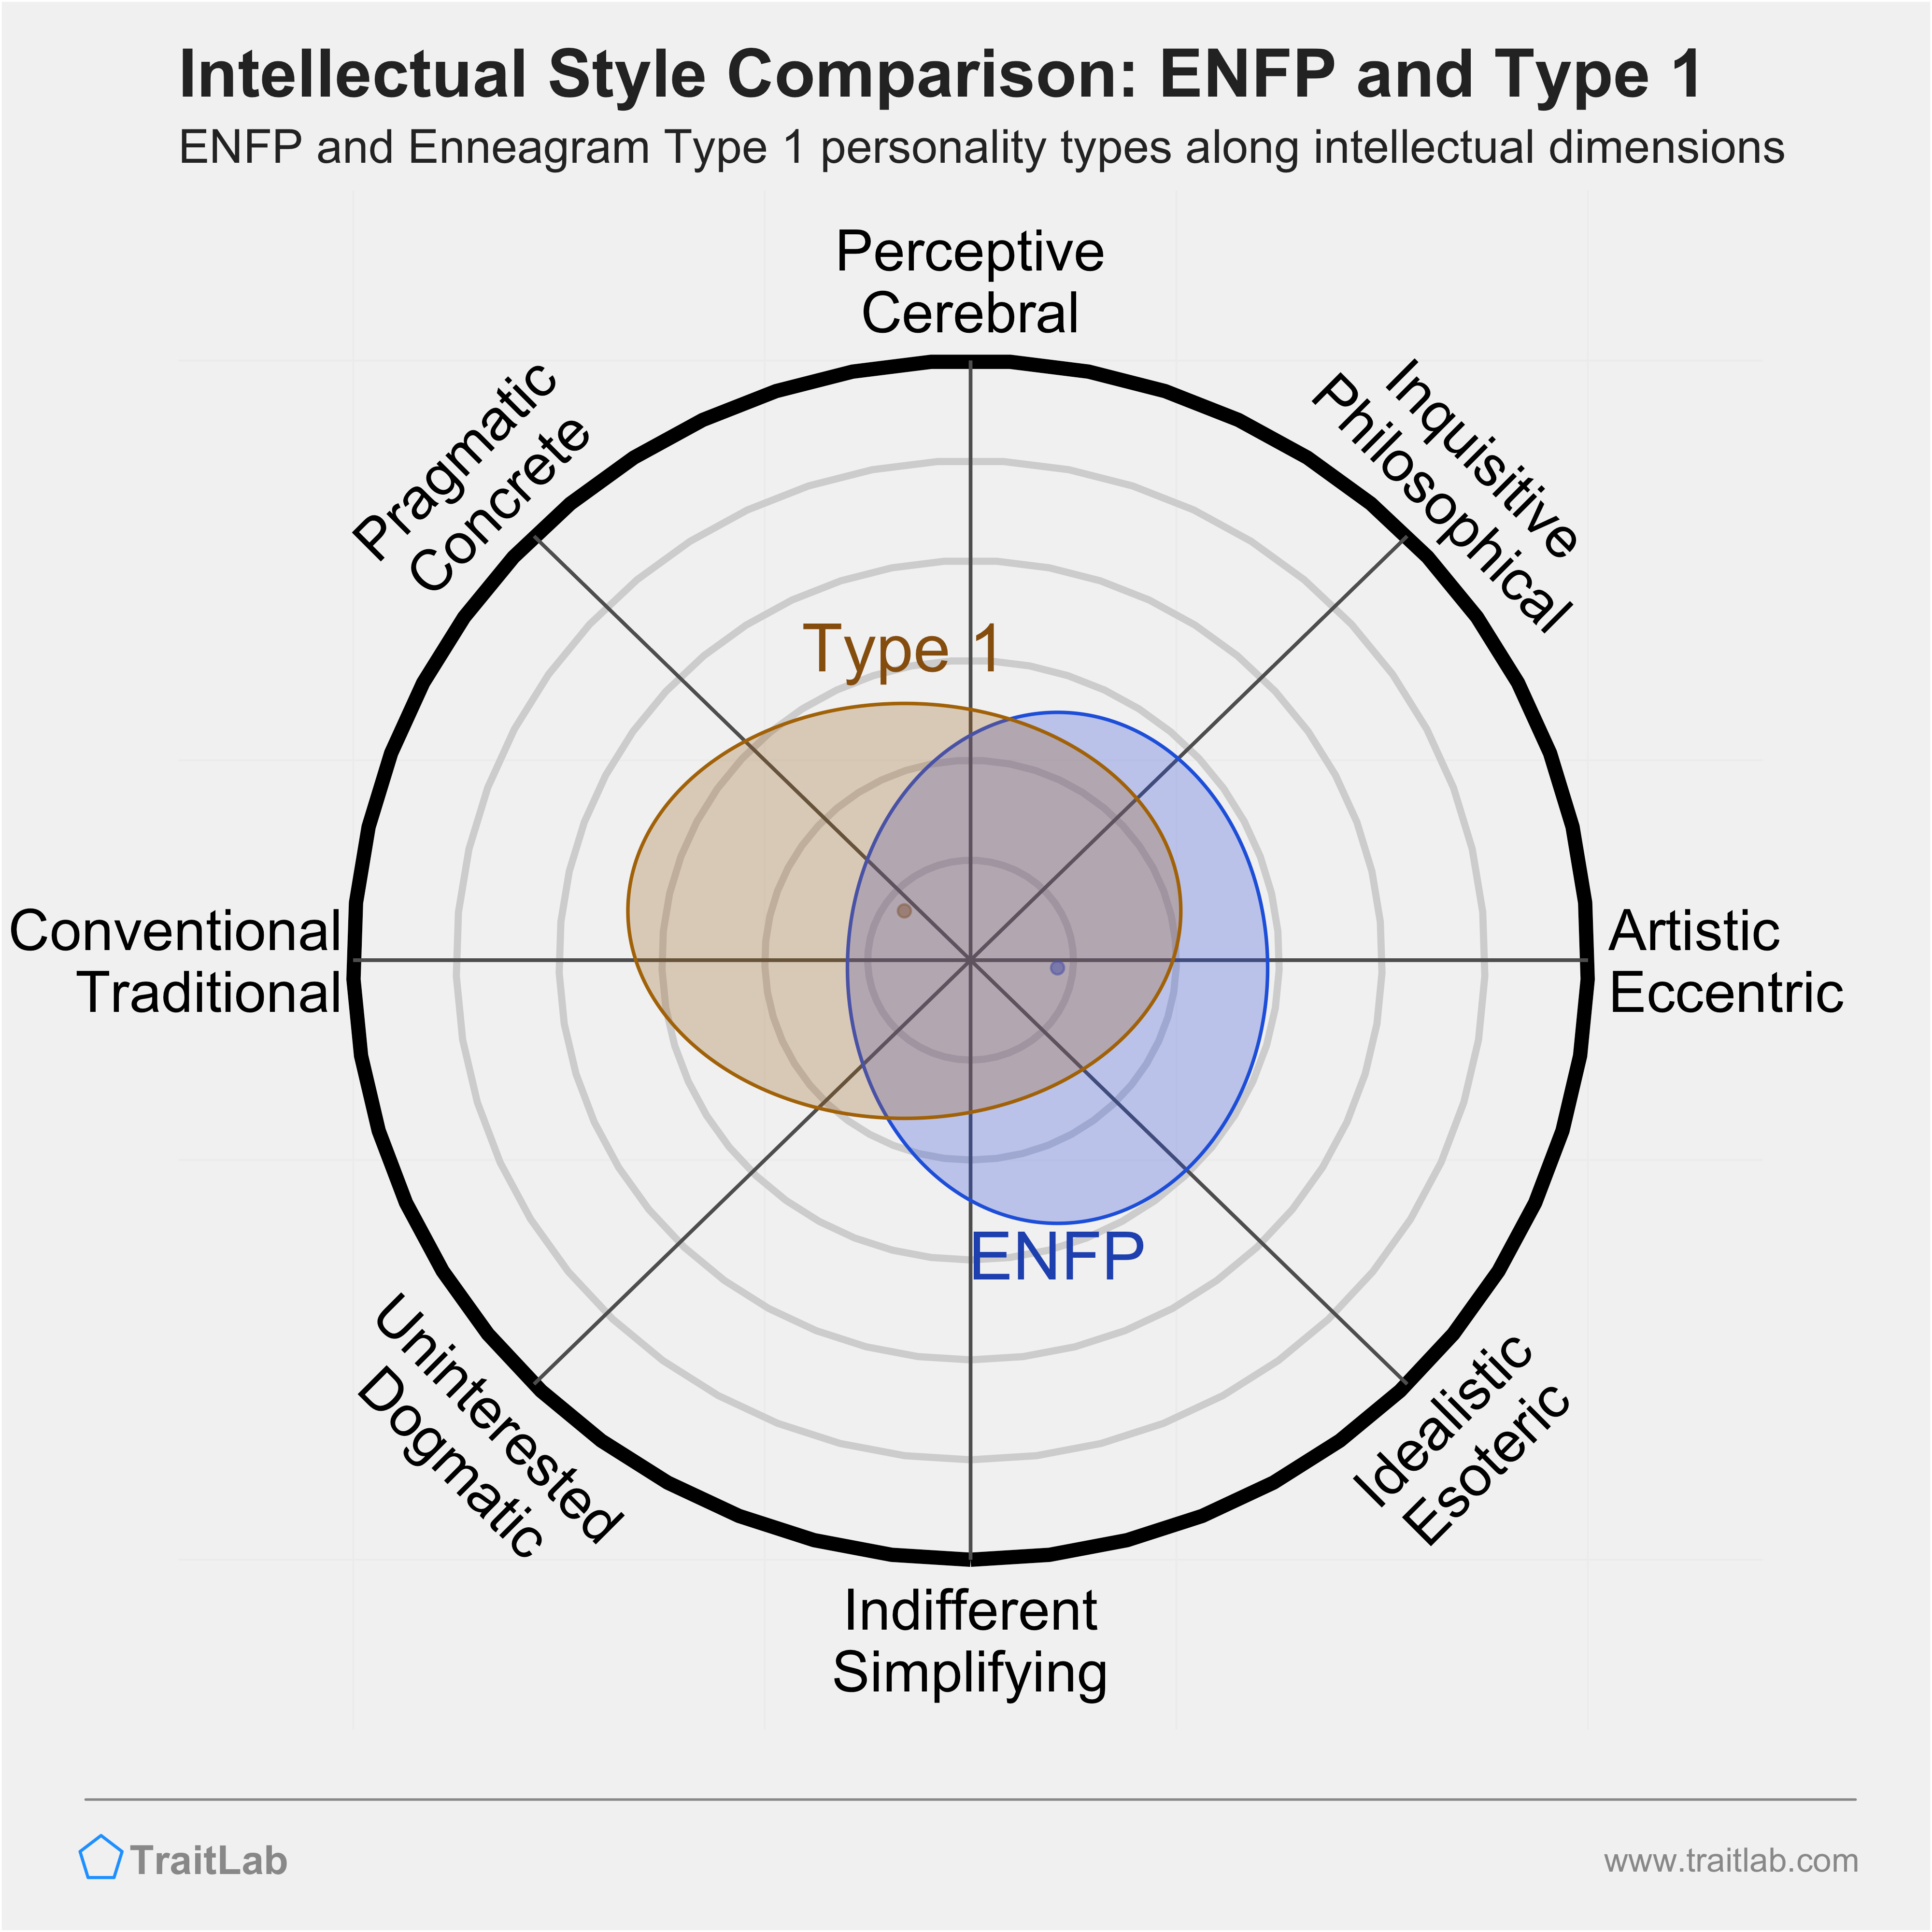 ENFP and Type 1 comparison across intellectual dimensions